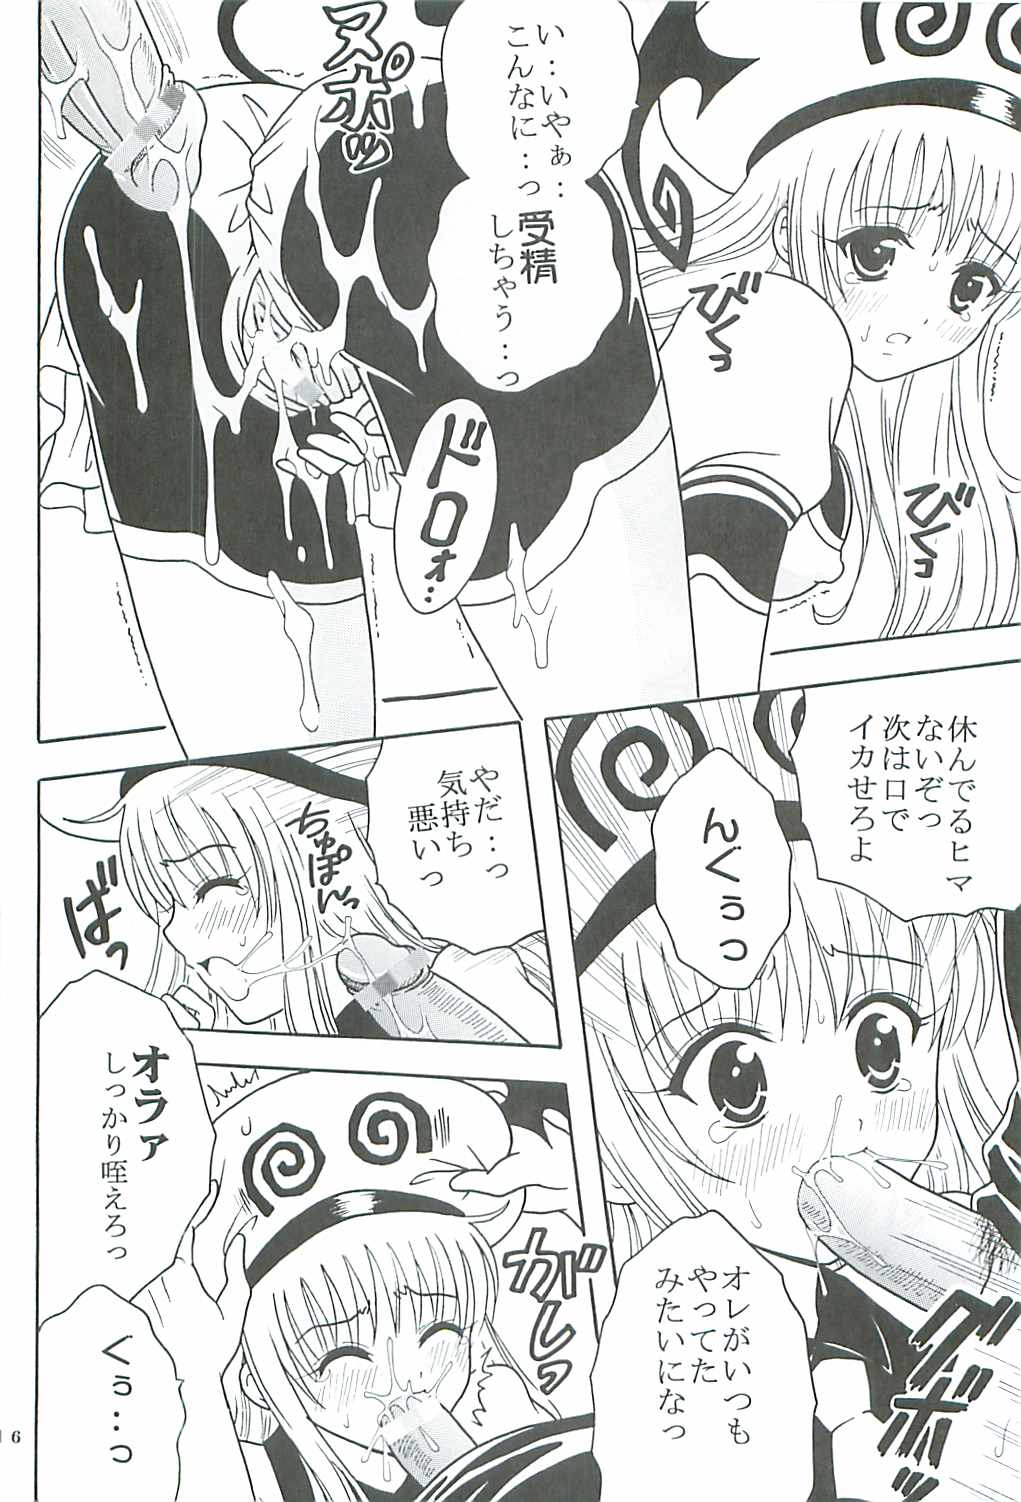 [St.Rio] ToLOVE Ryu 2 (To Love Ru) page 17 full